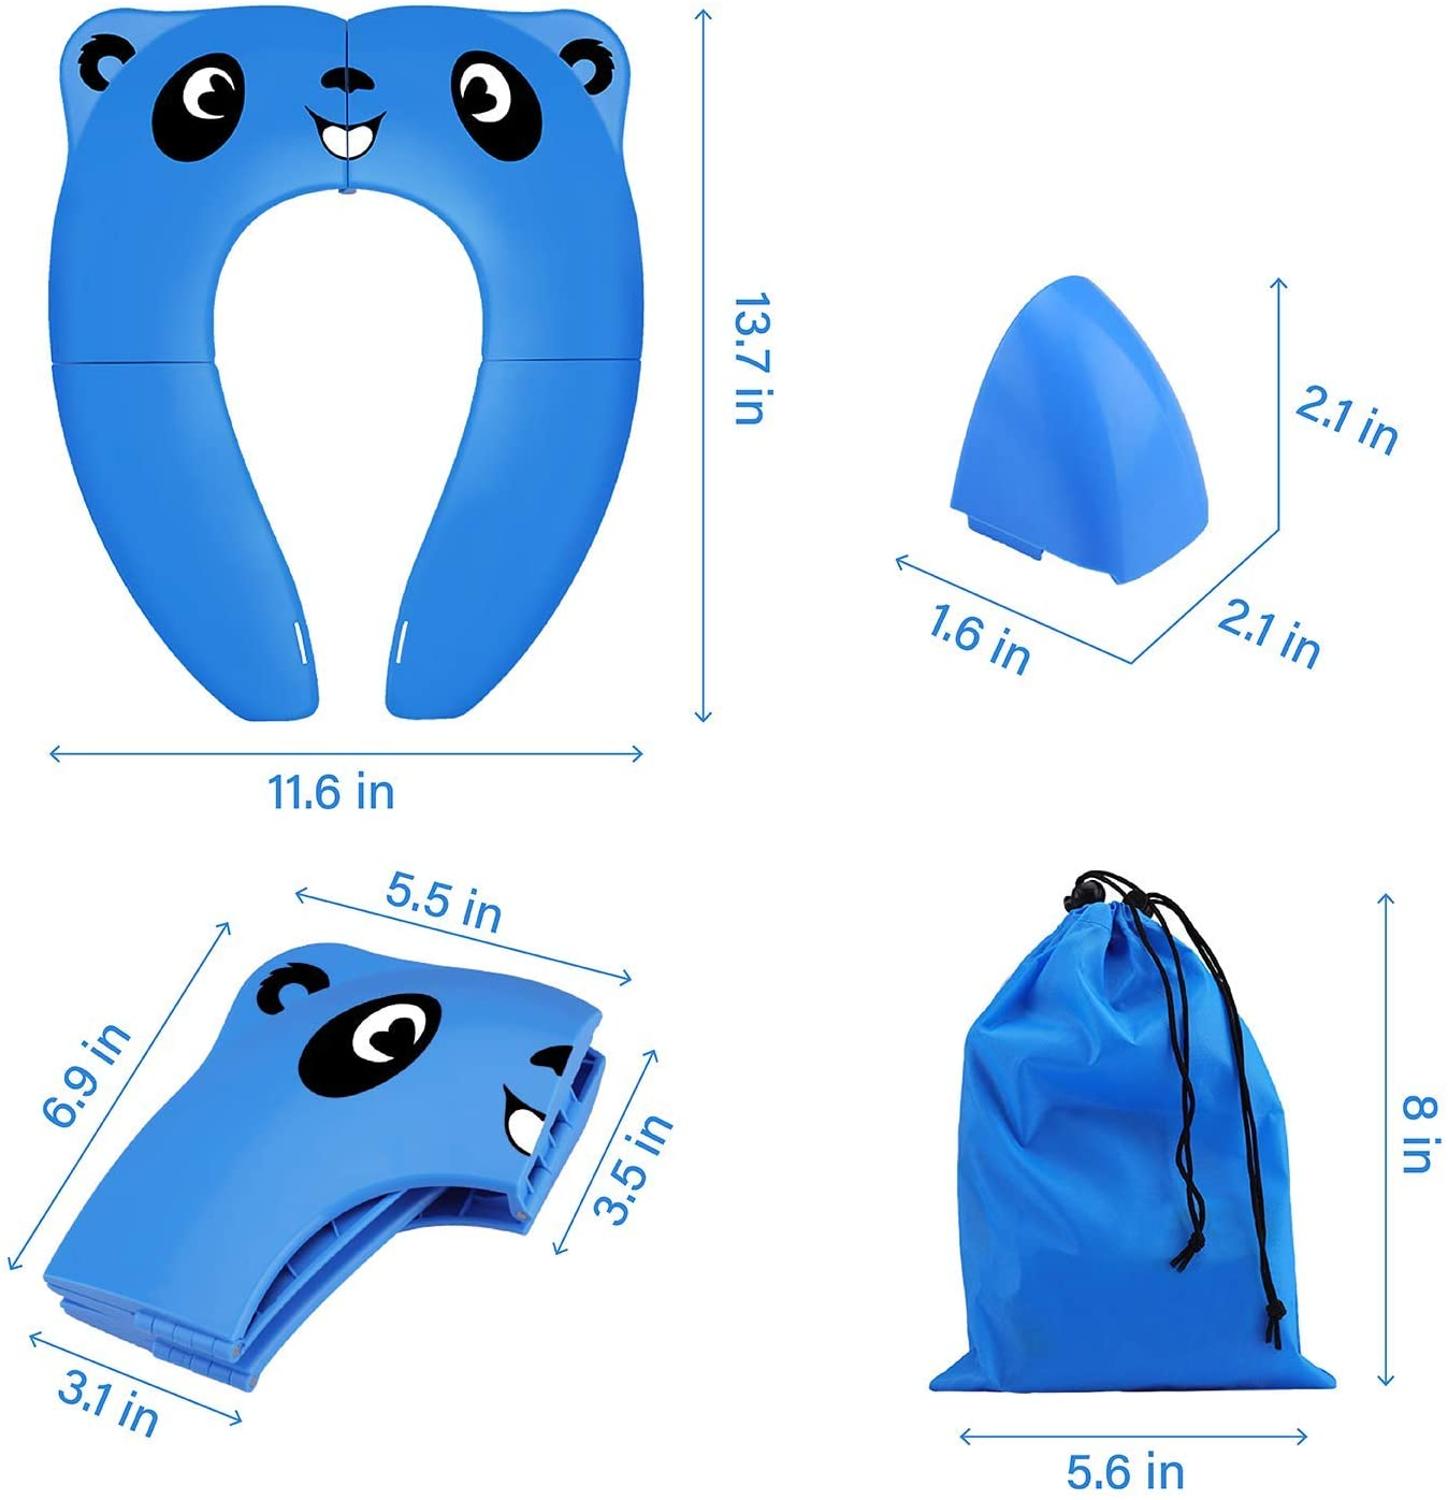 Toilet Training Seat Portable Toilet Seat Toddler PP Material with Carry Bag and 10 Packs Disposable Toilet Seat Covers (blue)